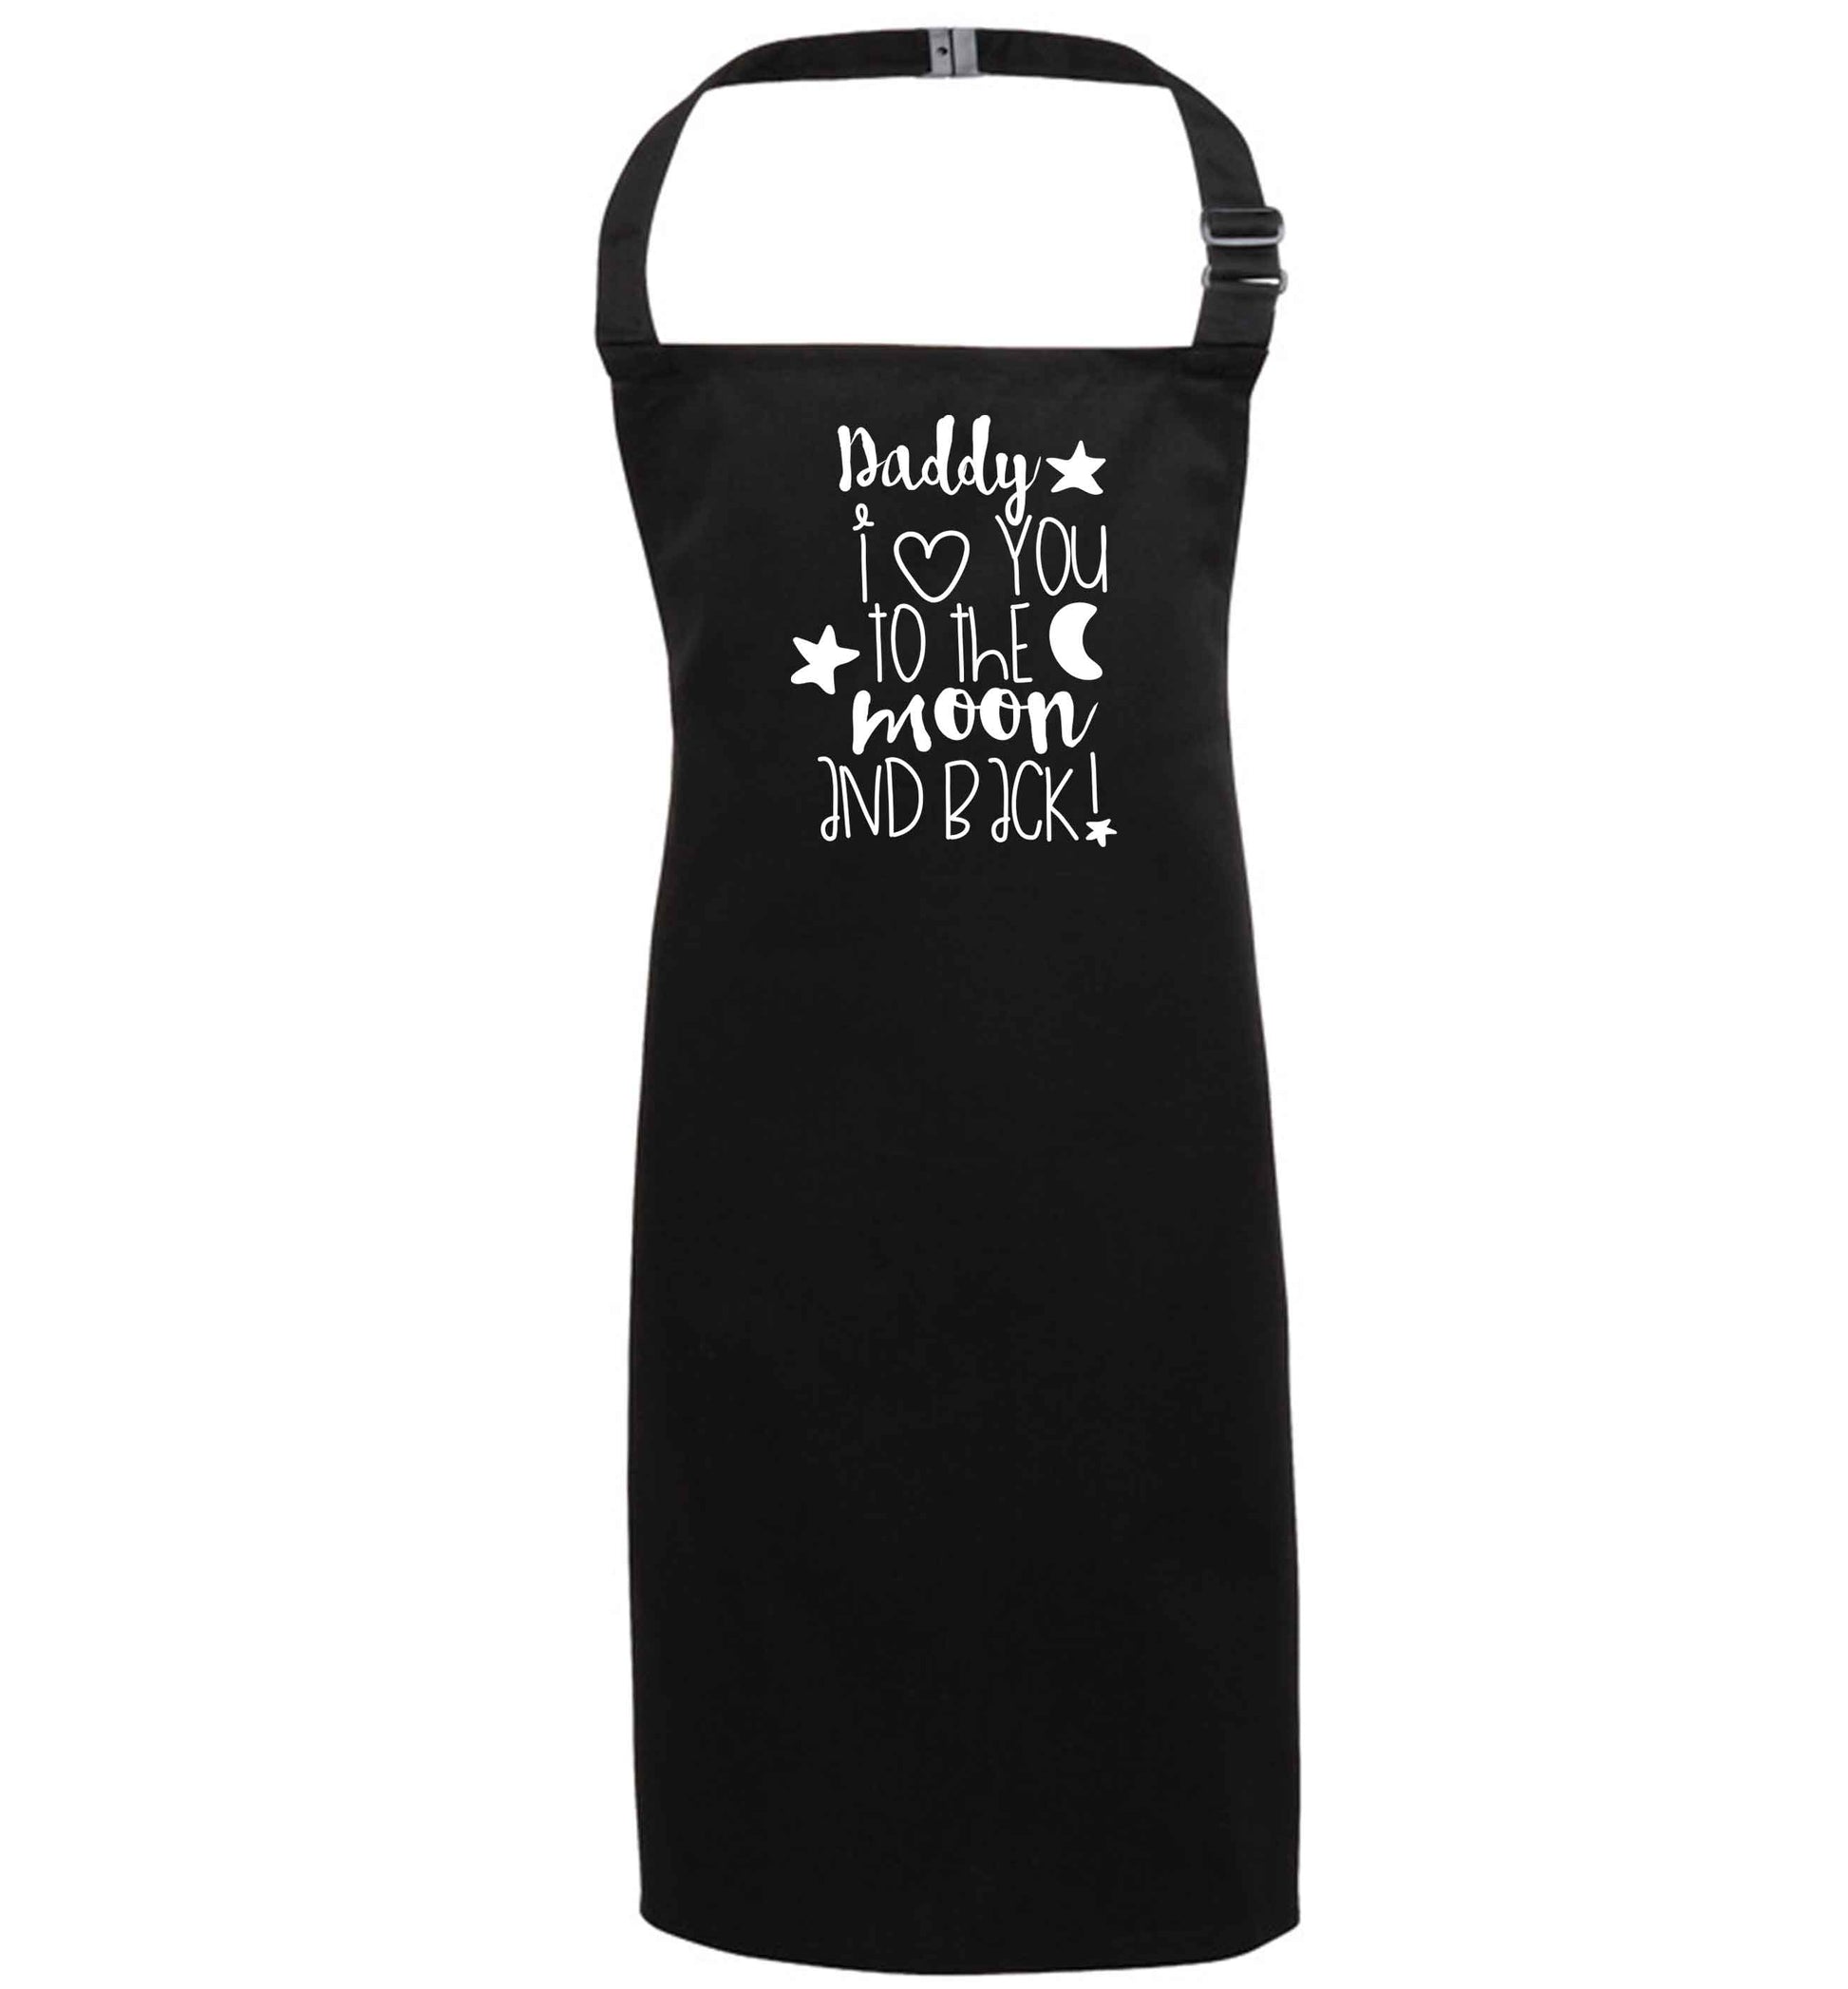 Daddy I love you to the moon and back black apron 7-10 years